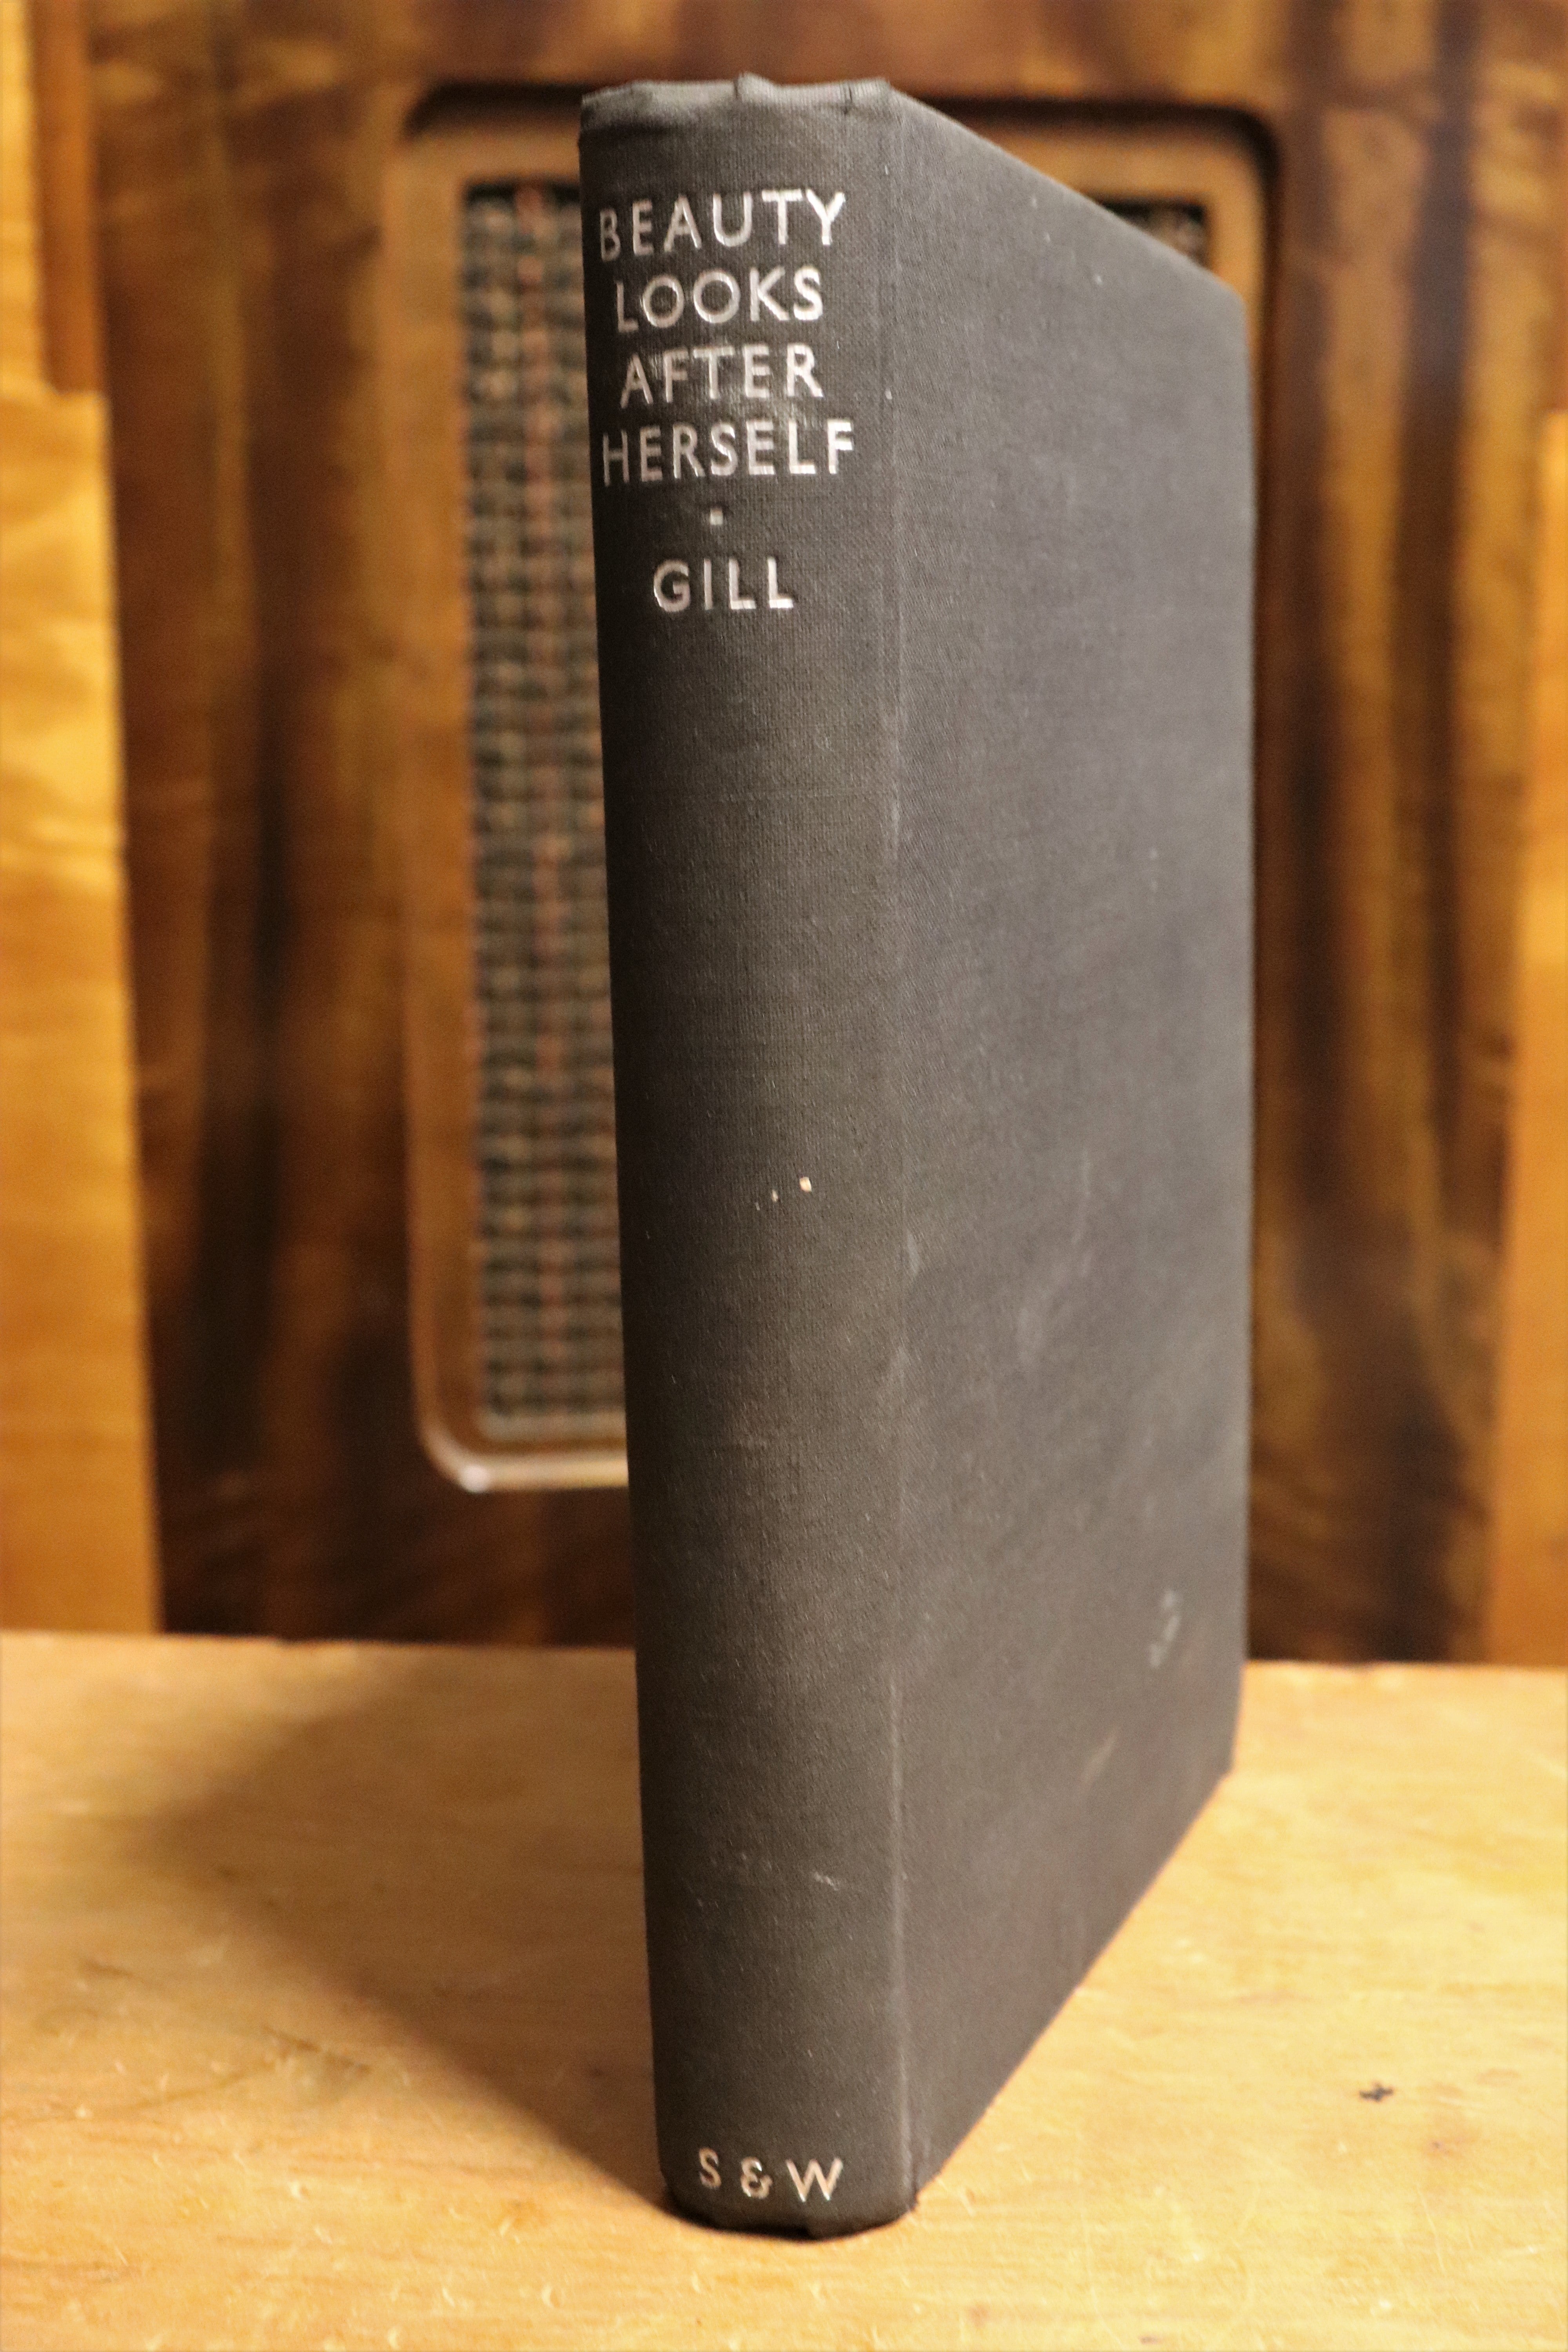 1933 Beauty Looks After Herself by Eric Gill Architecture Book 1st Edition